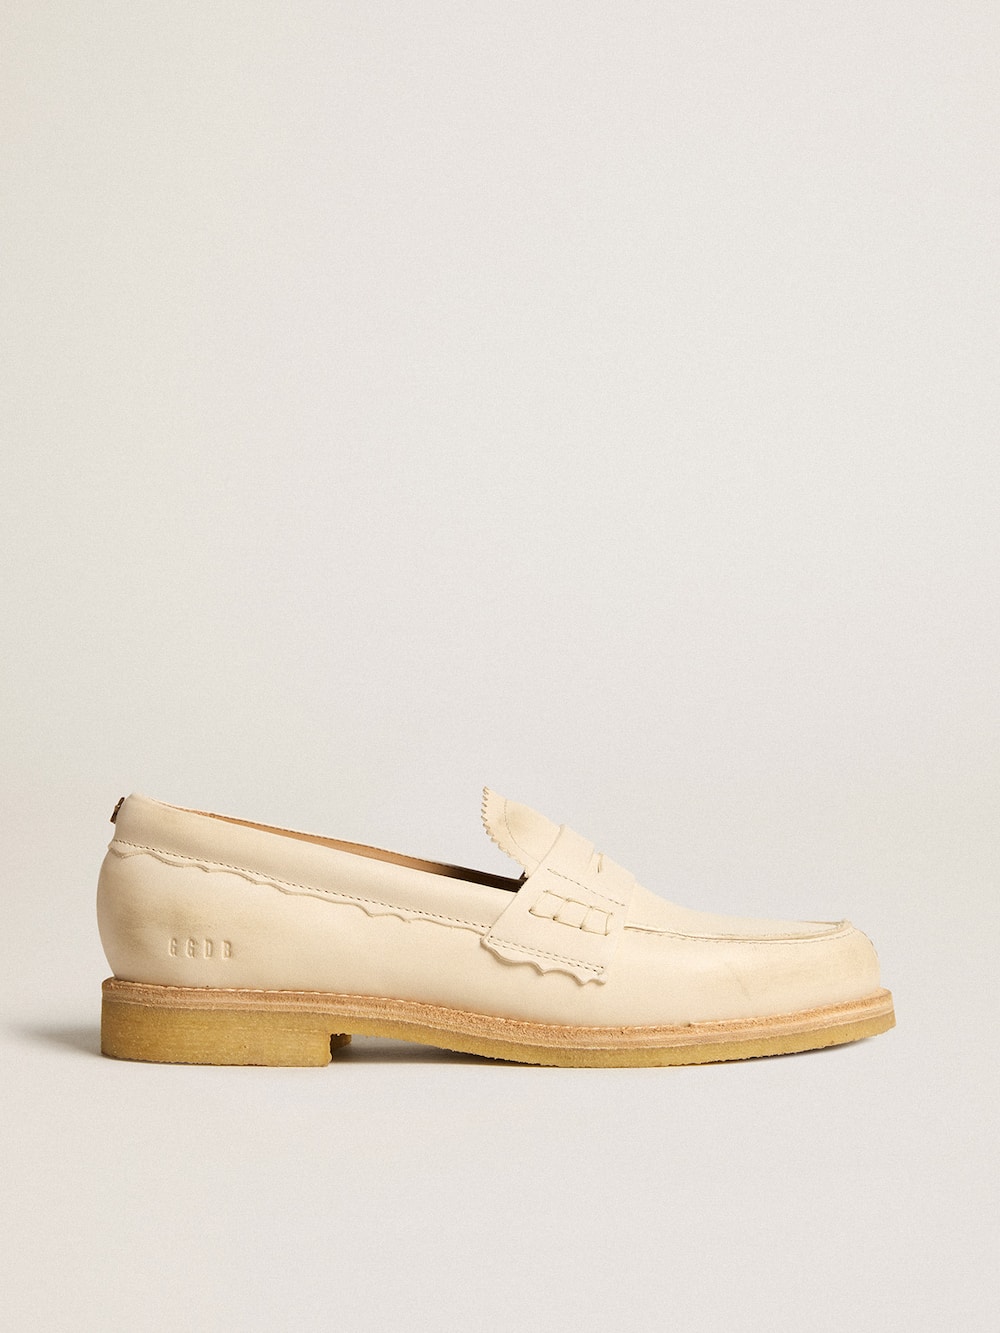 Golden Goose - Jerry loafer in butter-white leather in 